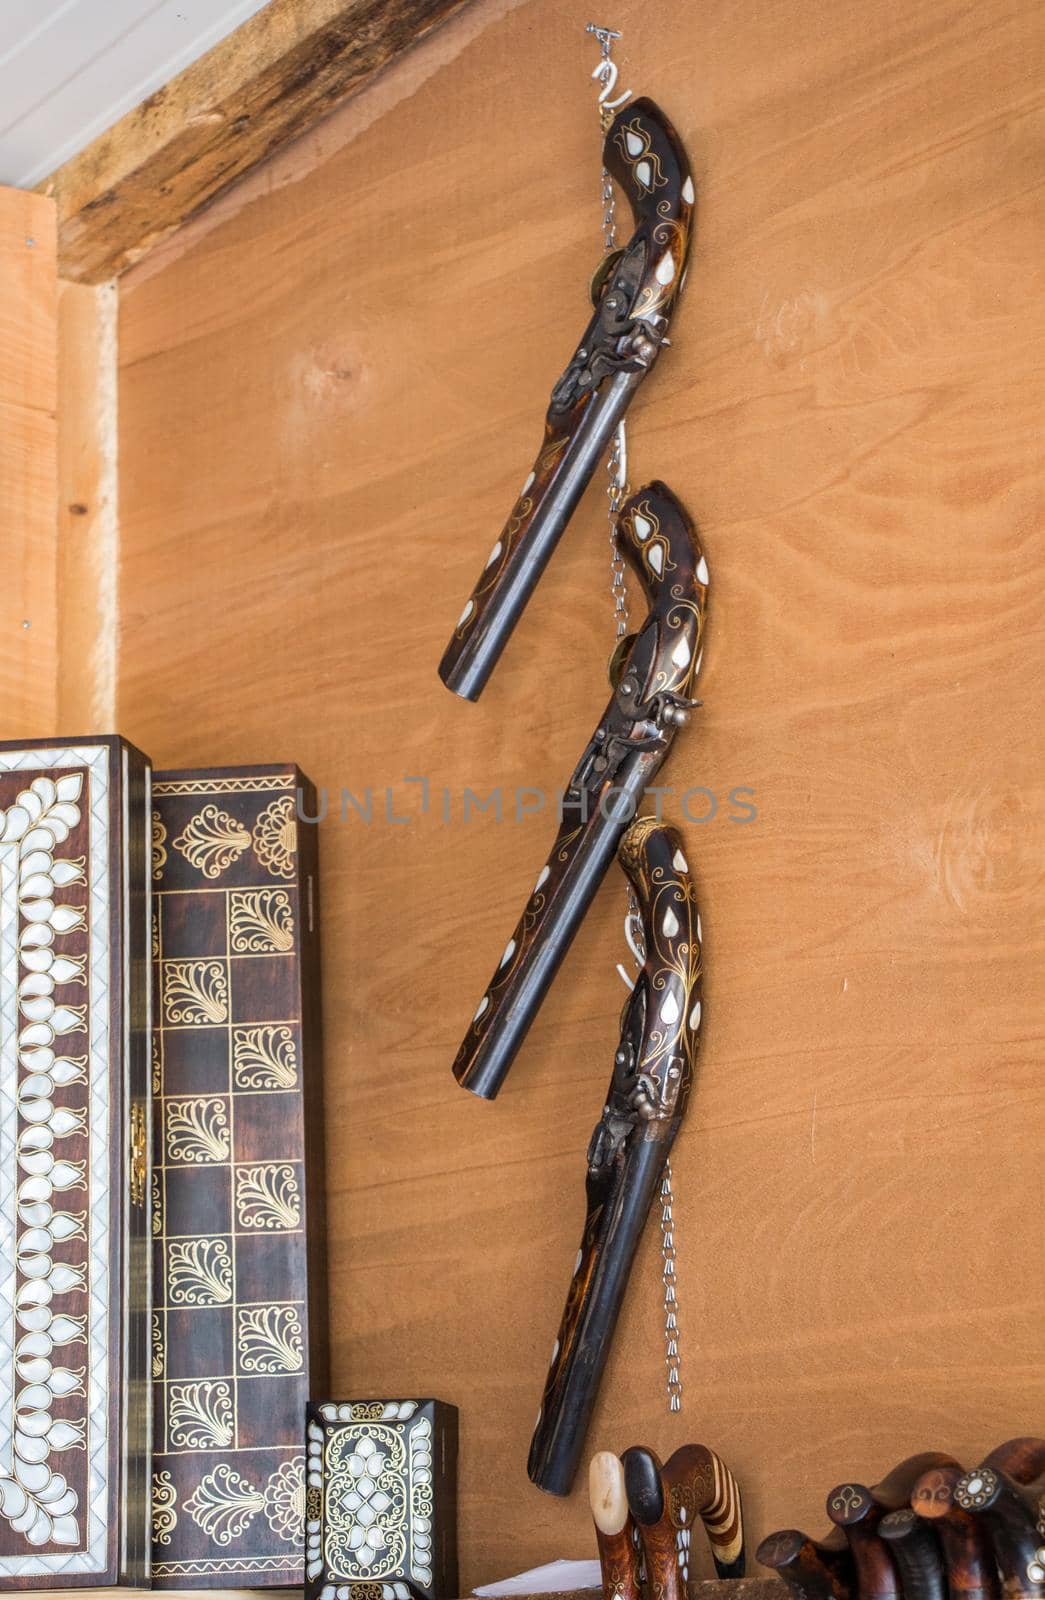 Antique stylistic revolve-like gun on a wooden background